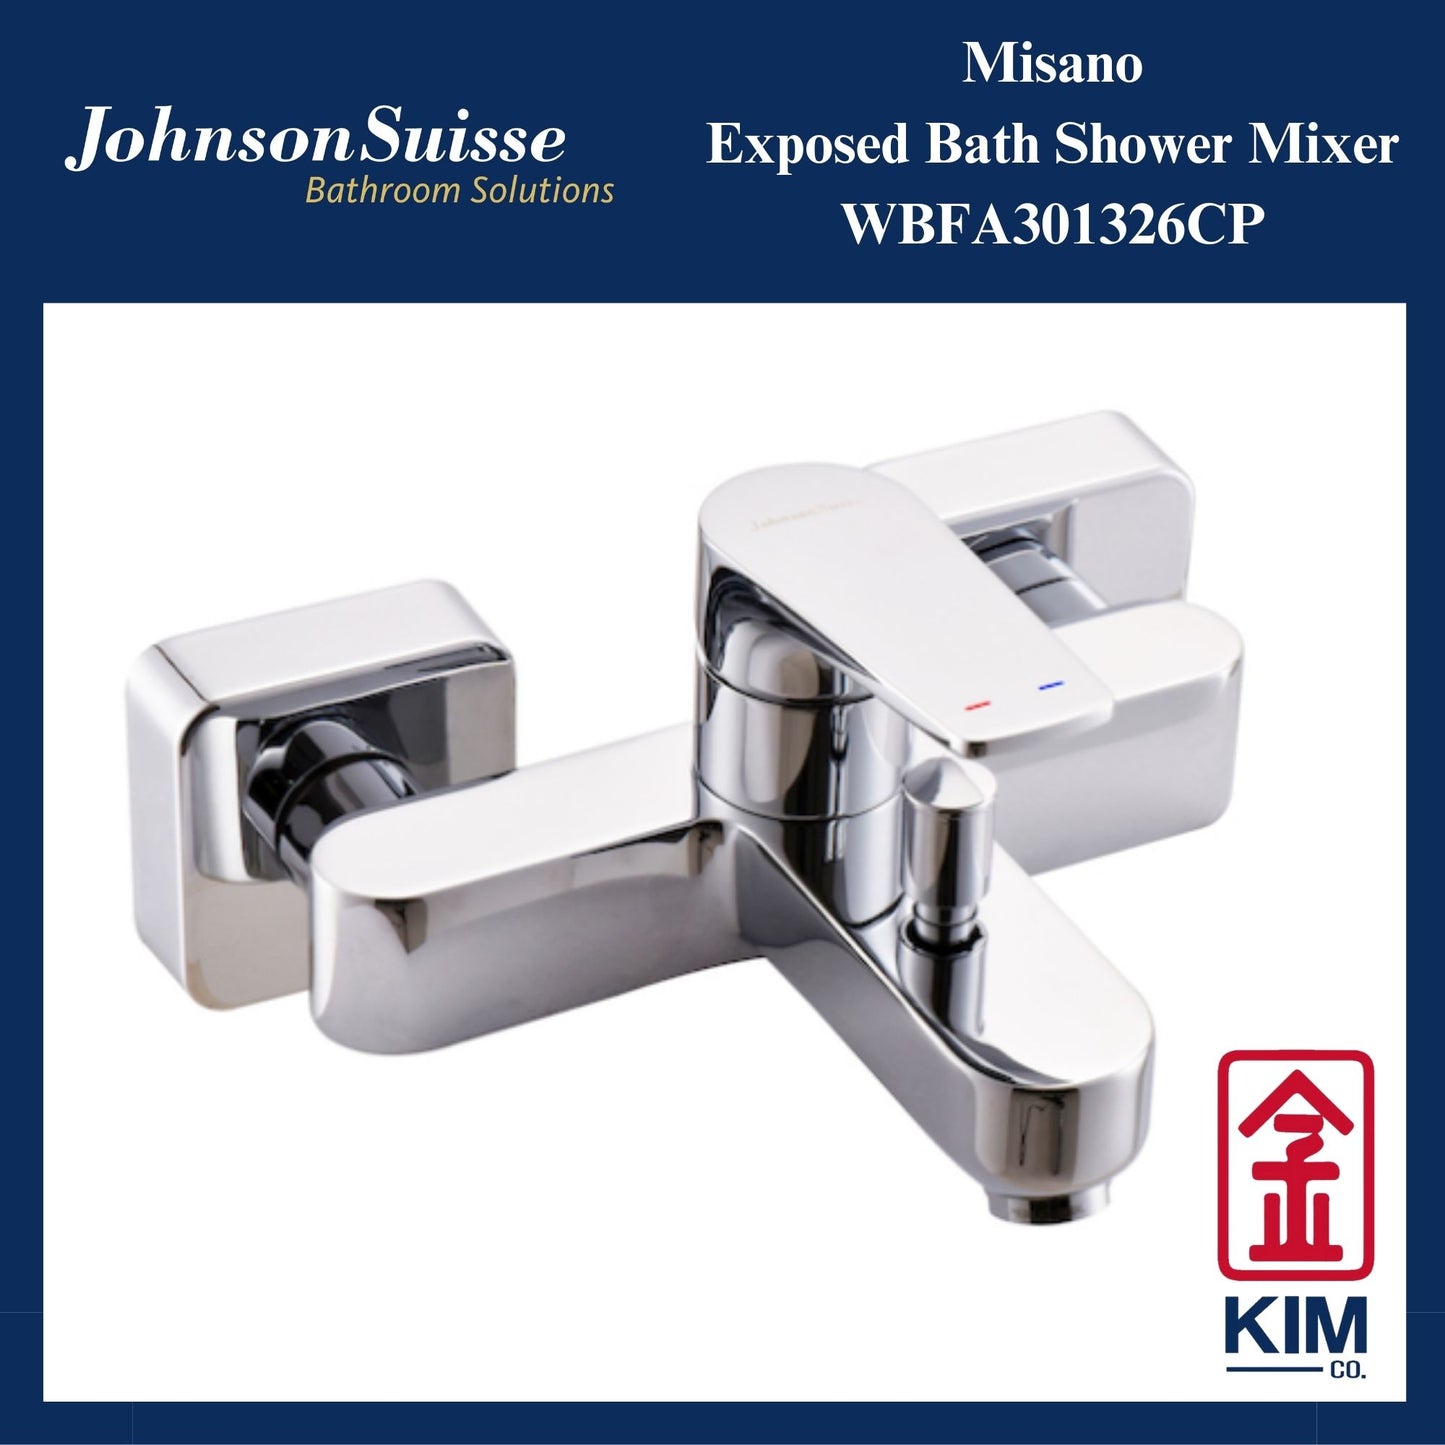 Johnson Suisse Misano Exposed Bath Shower Mixer Without Shower Kit (WBFA301326CP)